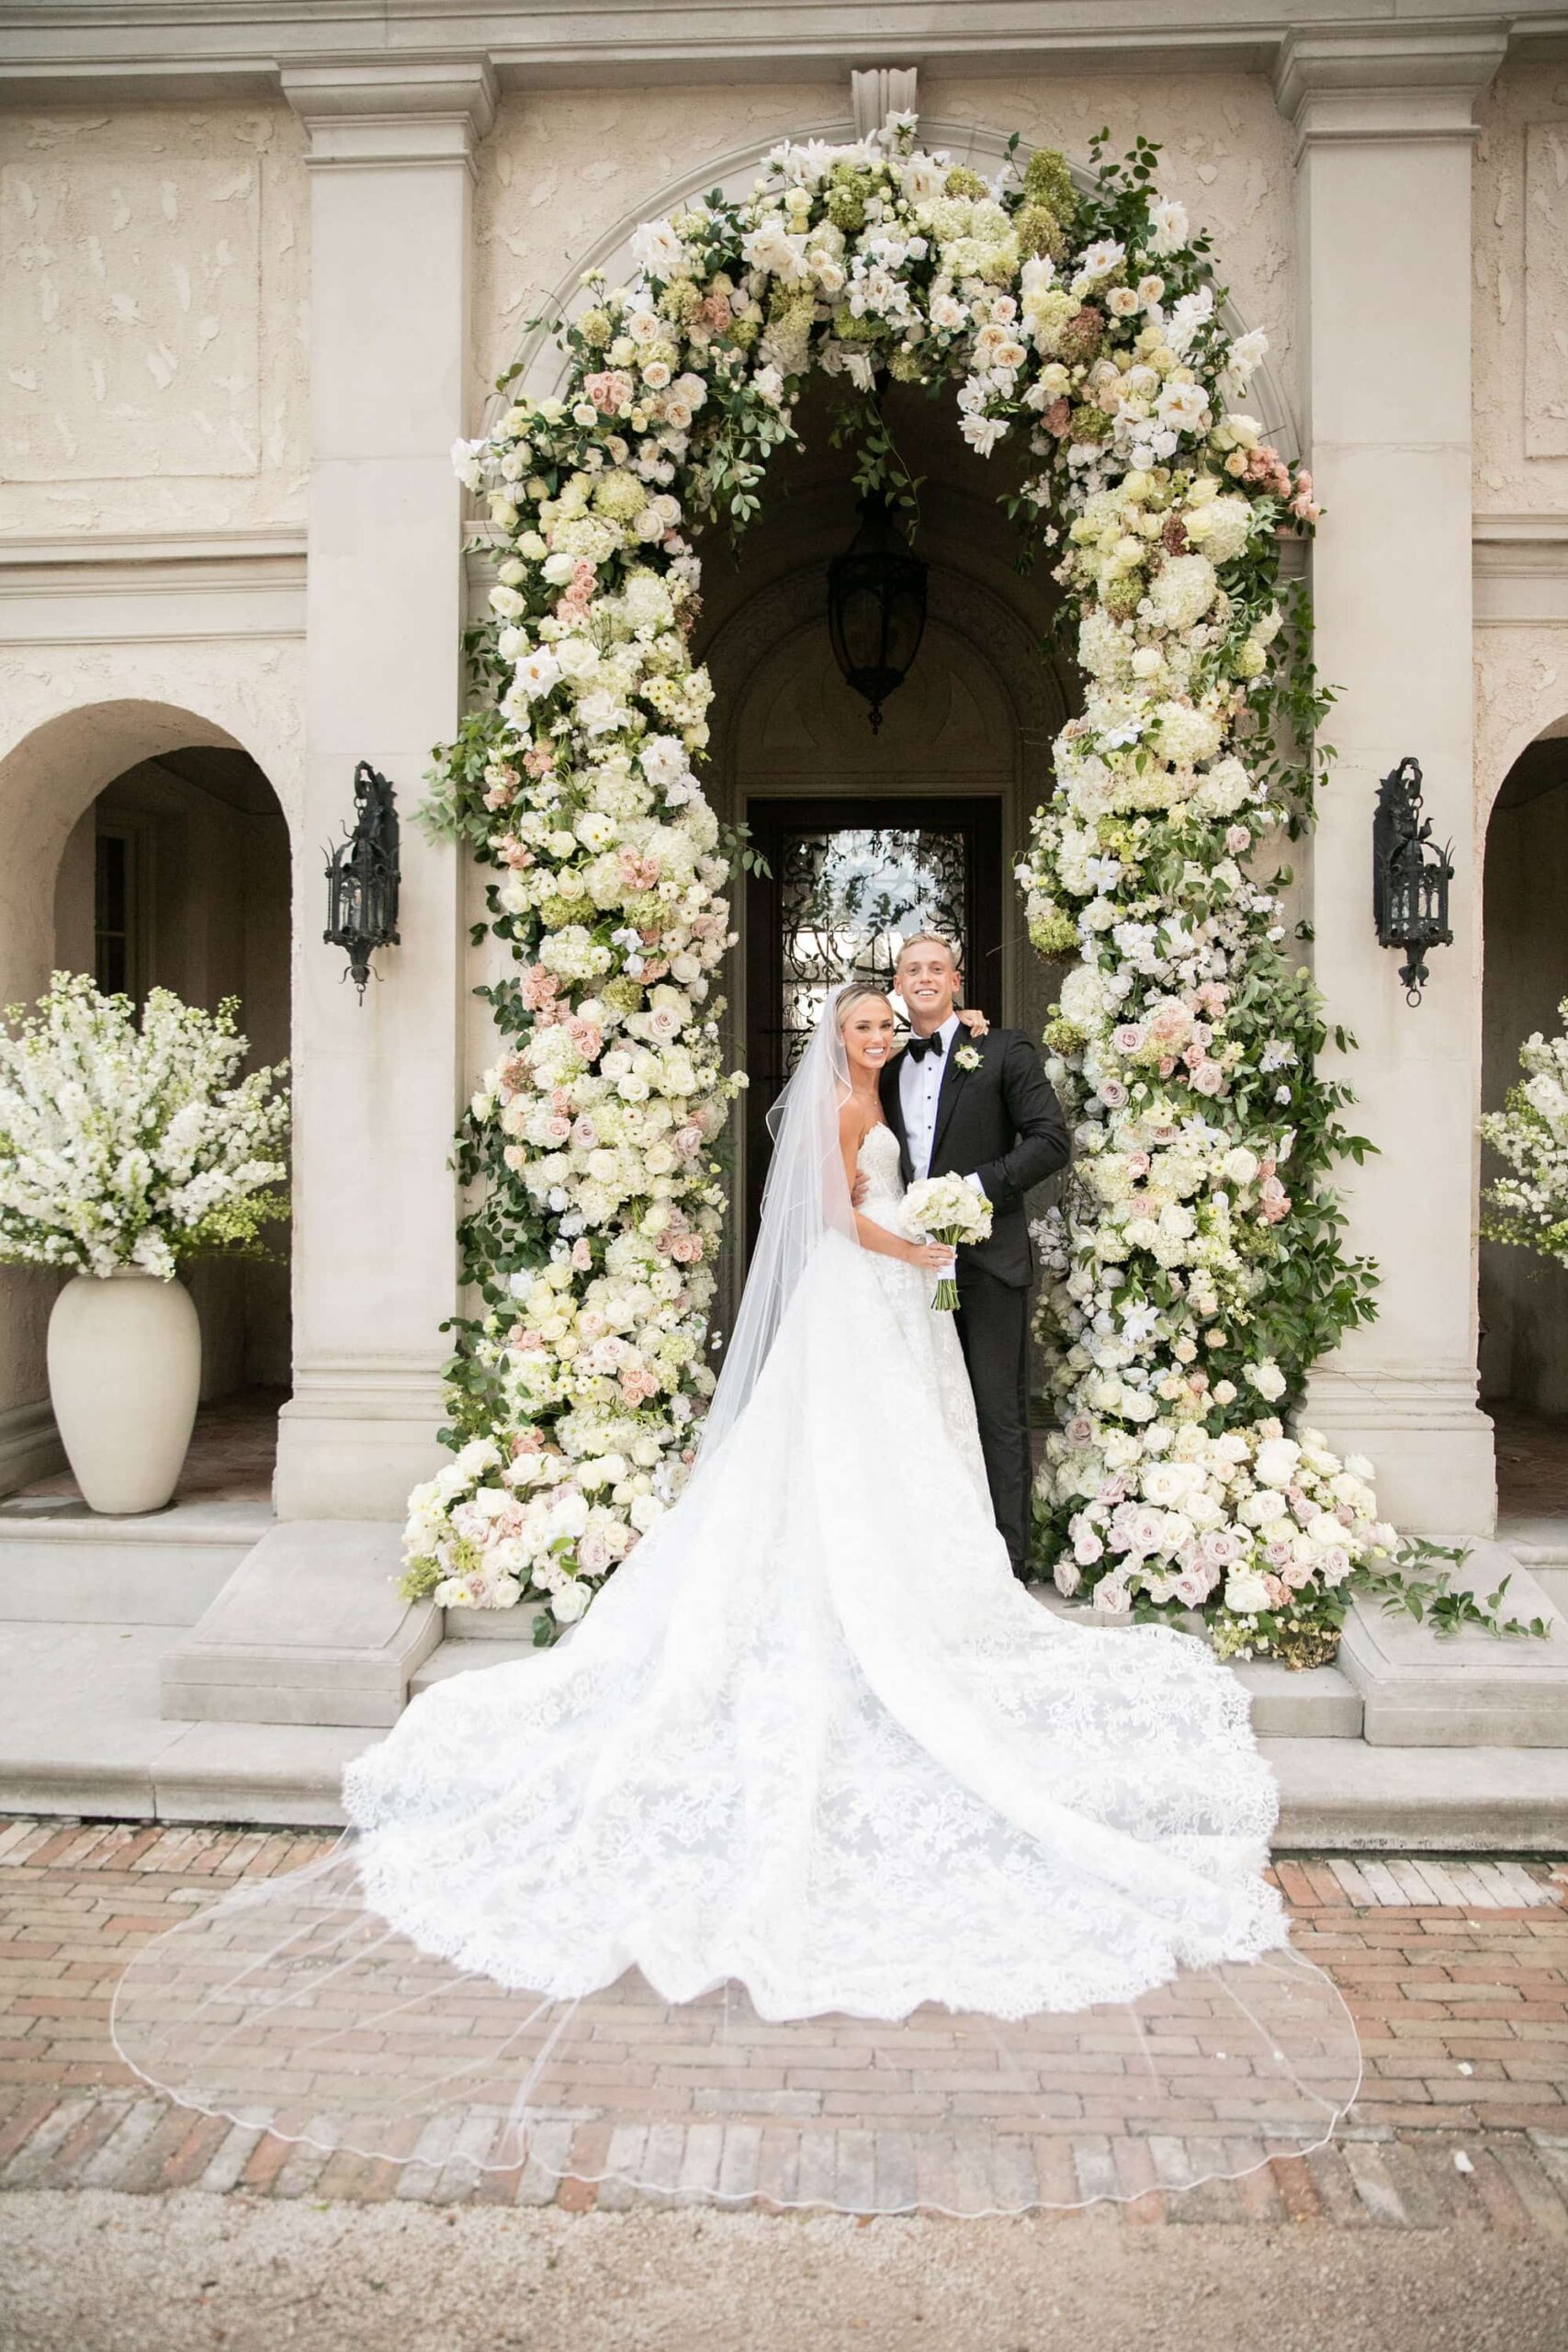 Married couple poses in wedding attire with flower arch behind